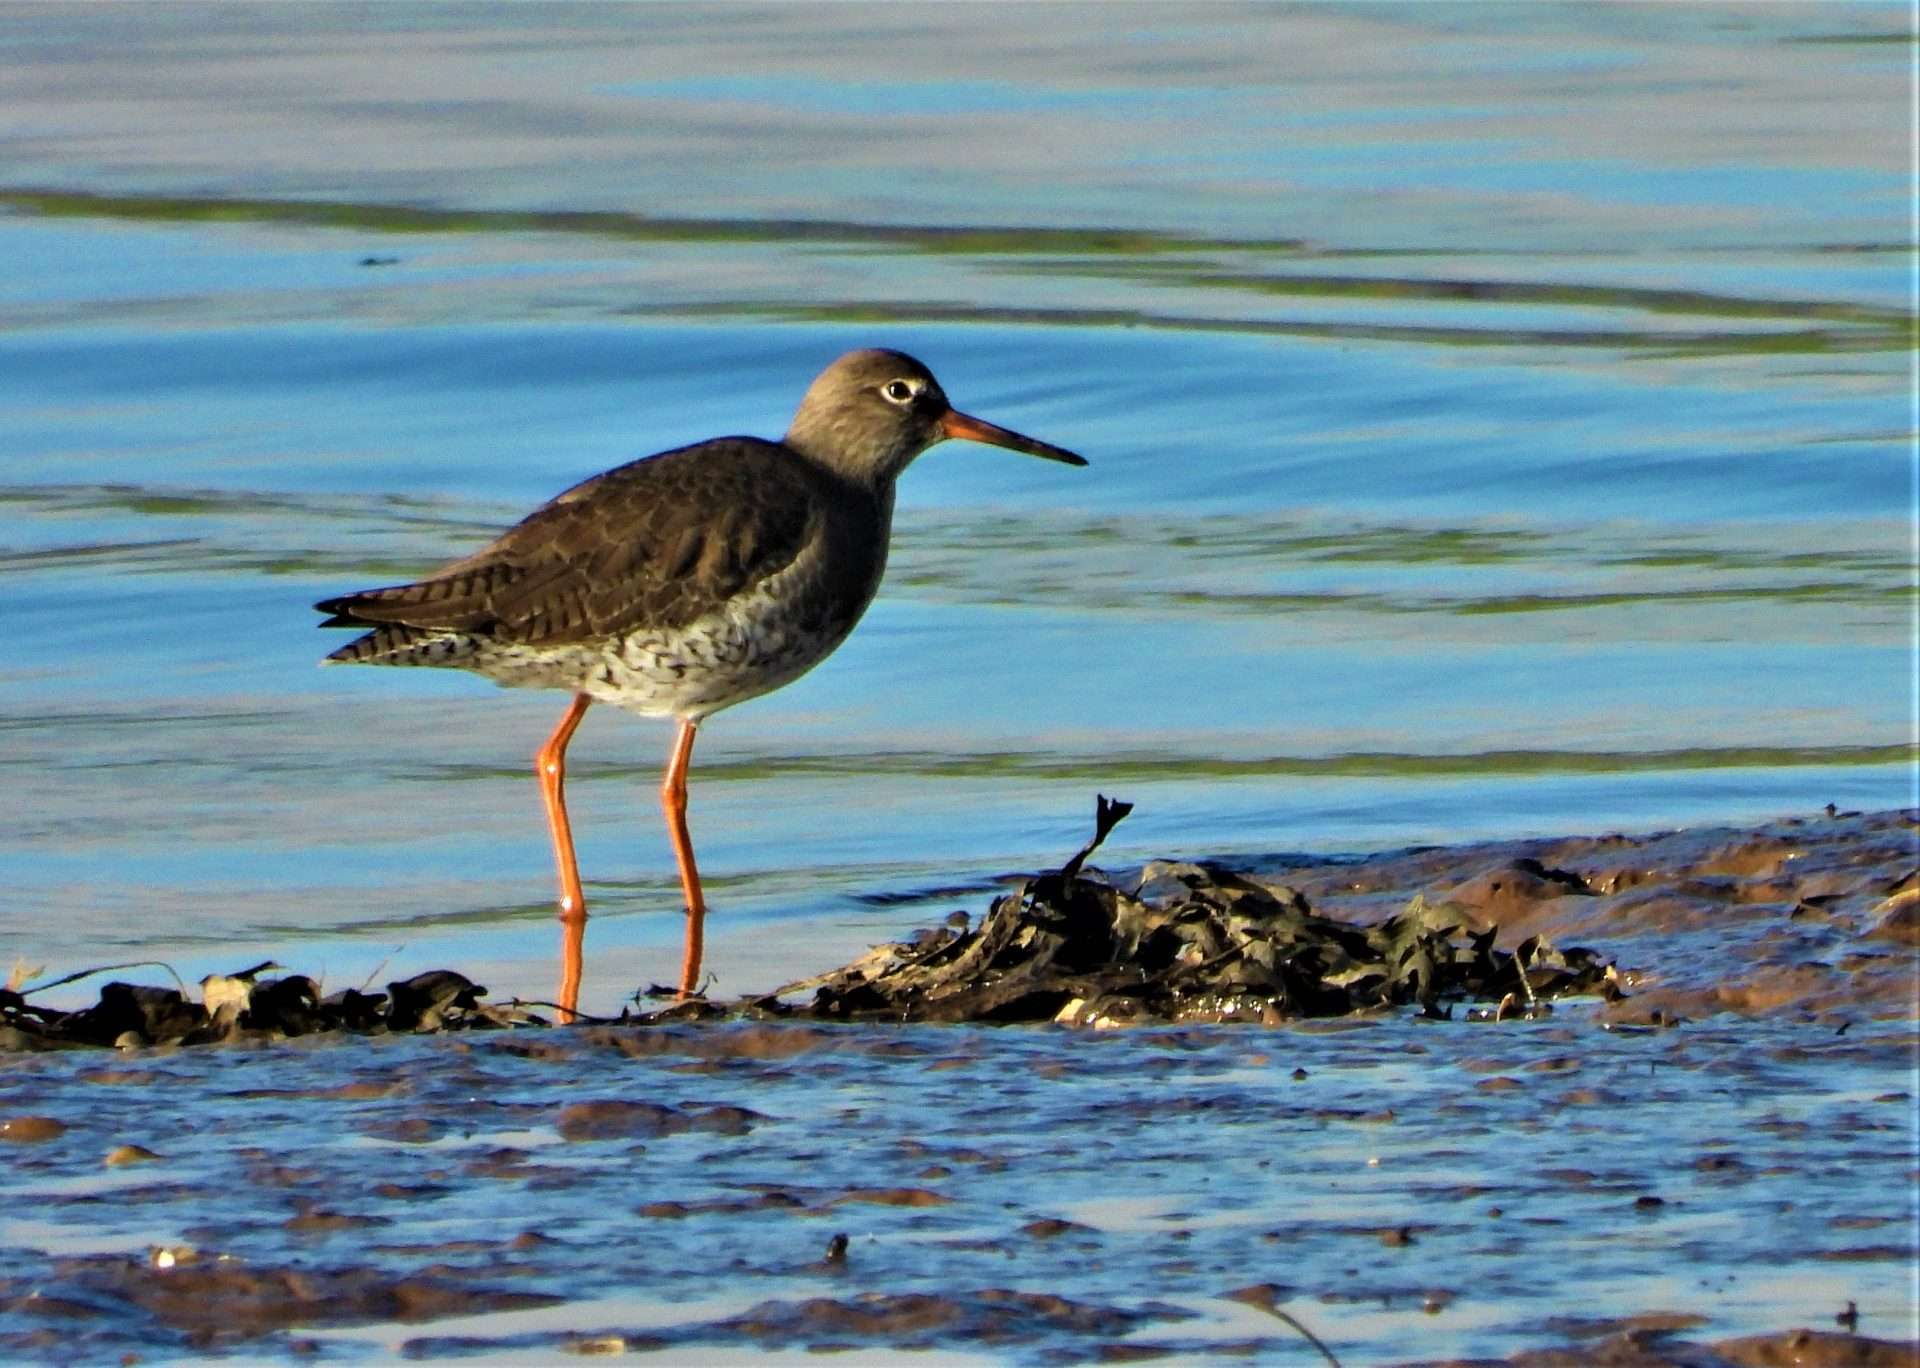 Redshank by Kenneth at Combe cellars